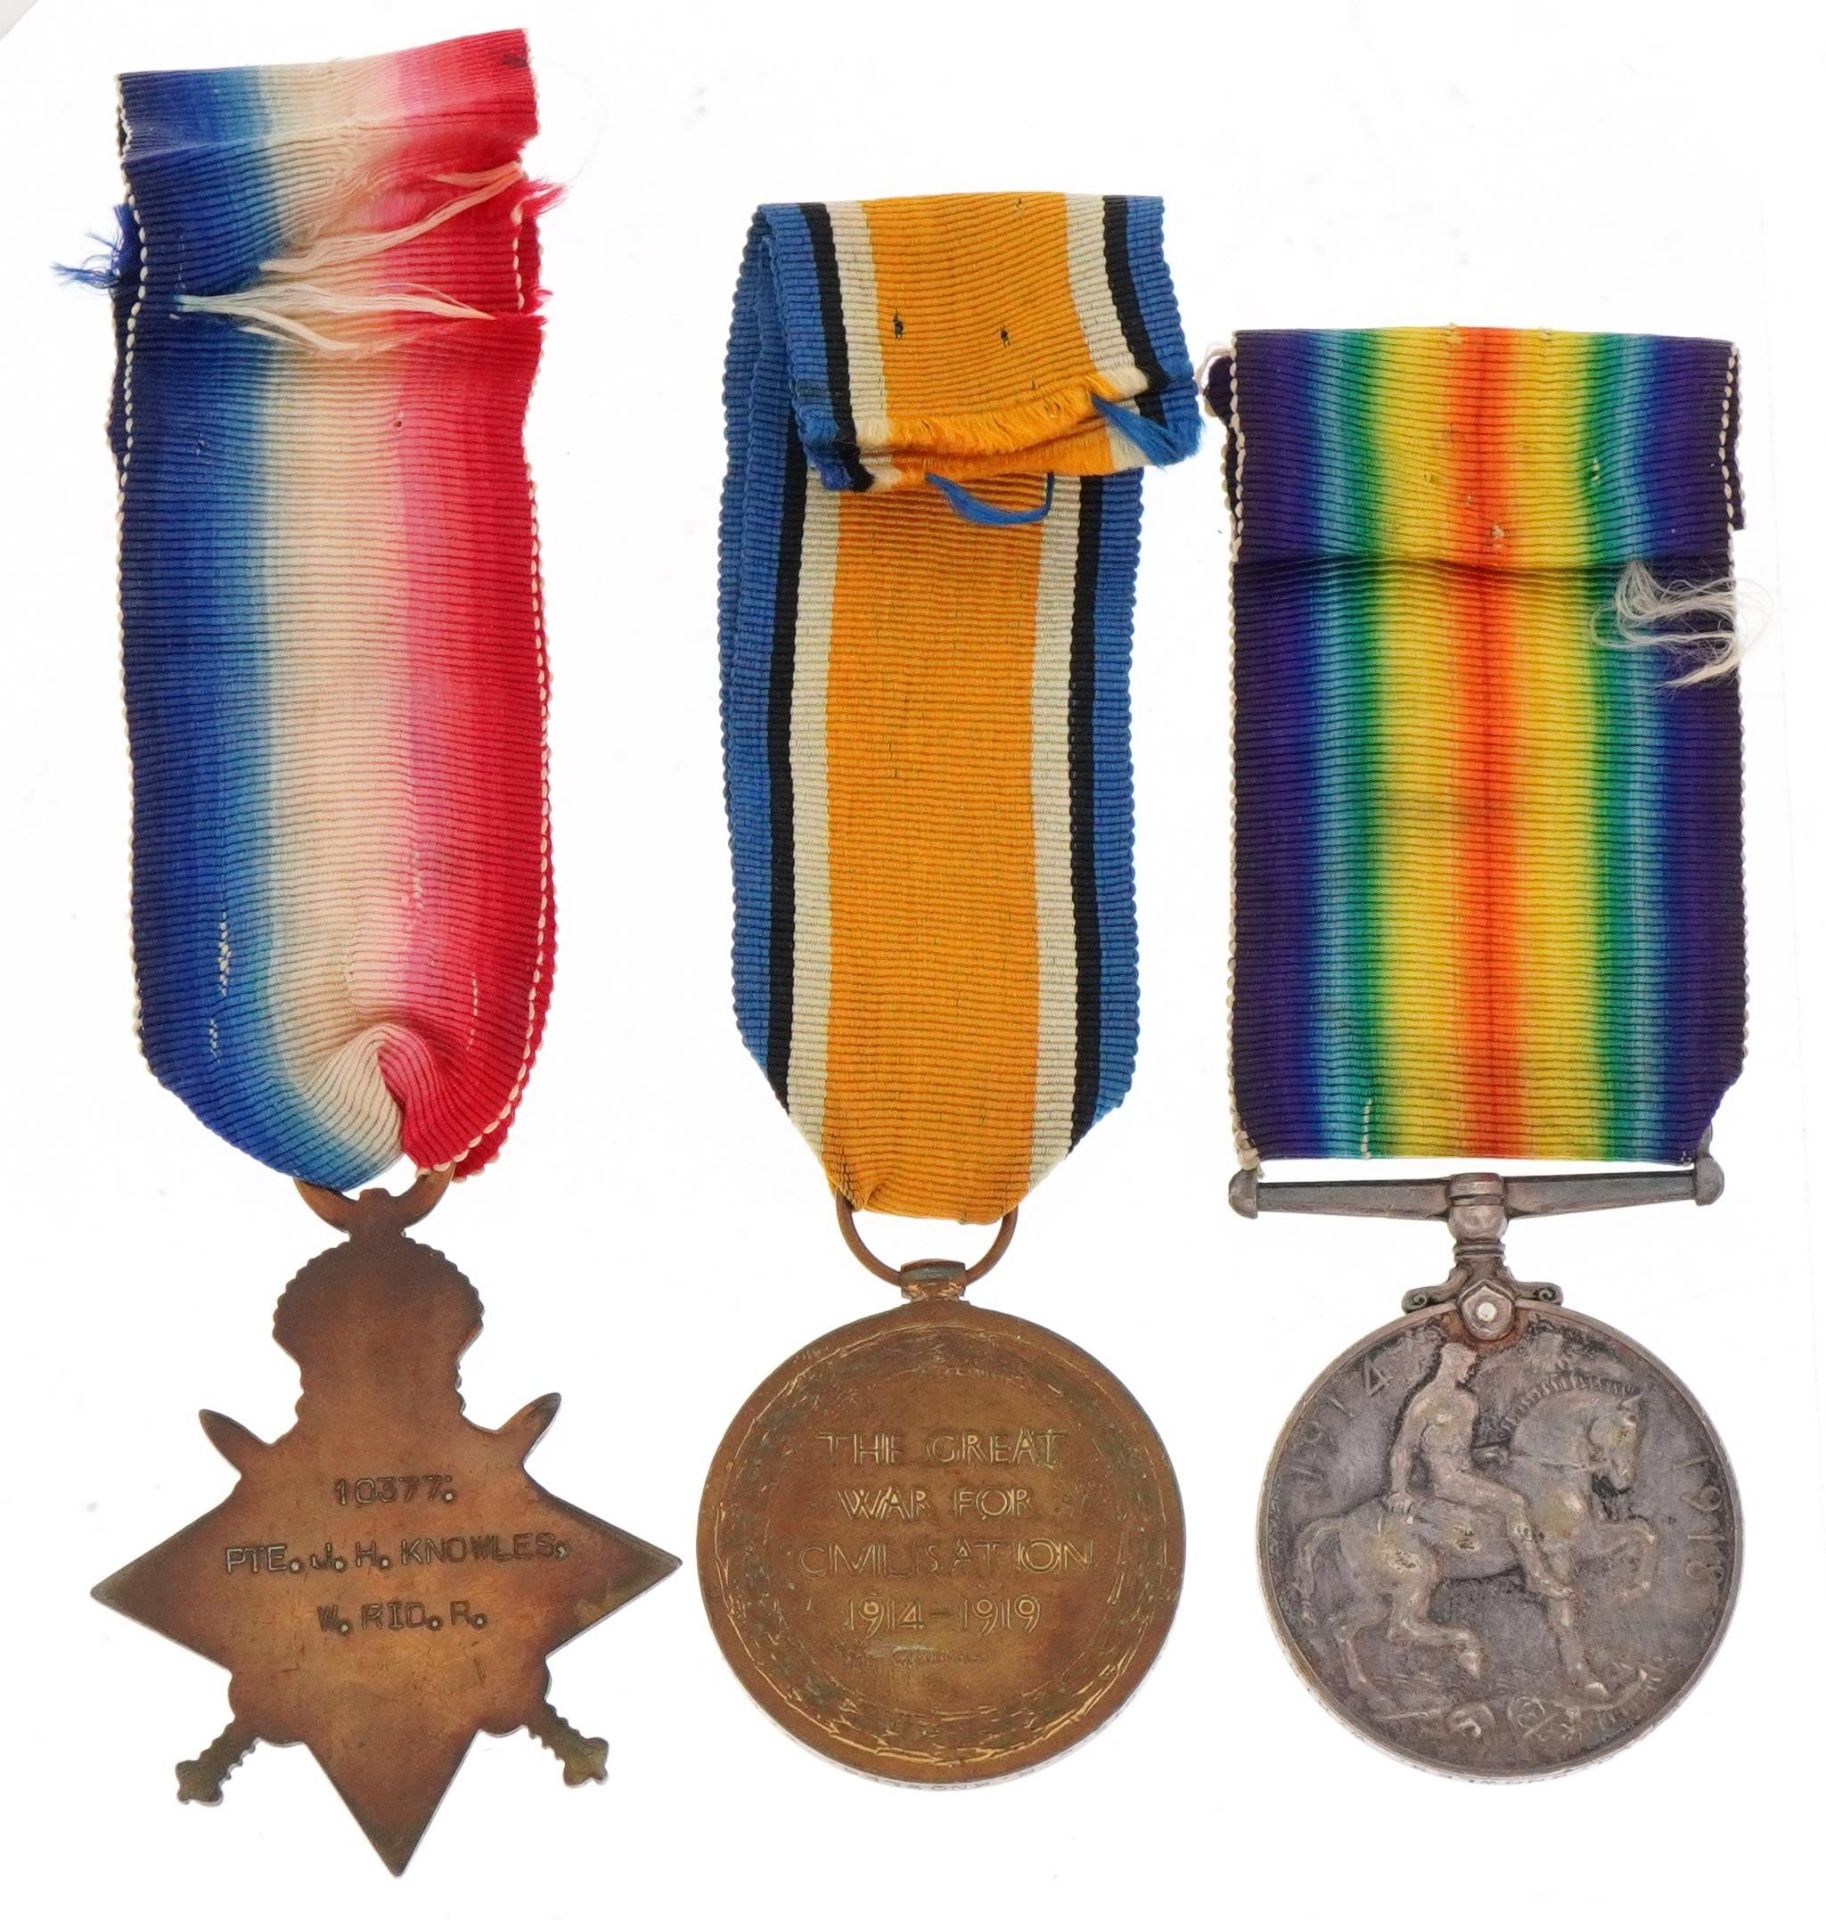 British military World War I trio awarded to 14250.PTE.J.H.KNOWLES.W.RID.R. : For further - Bild 4 aus 8